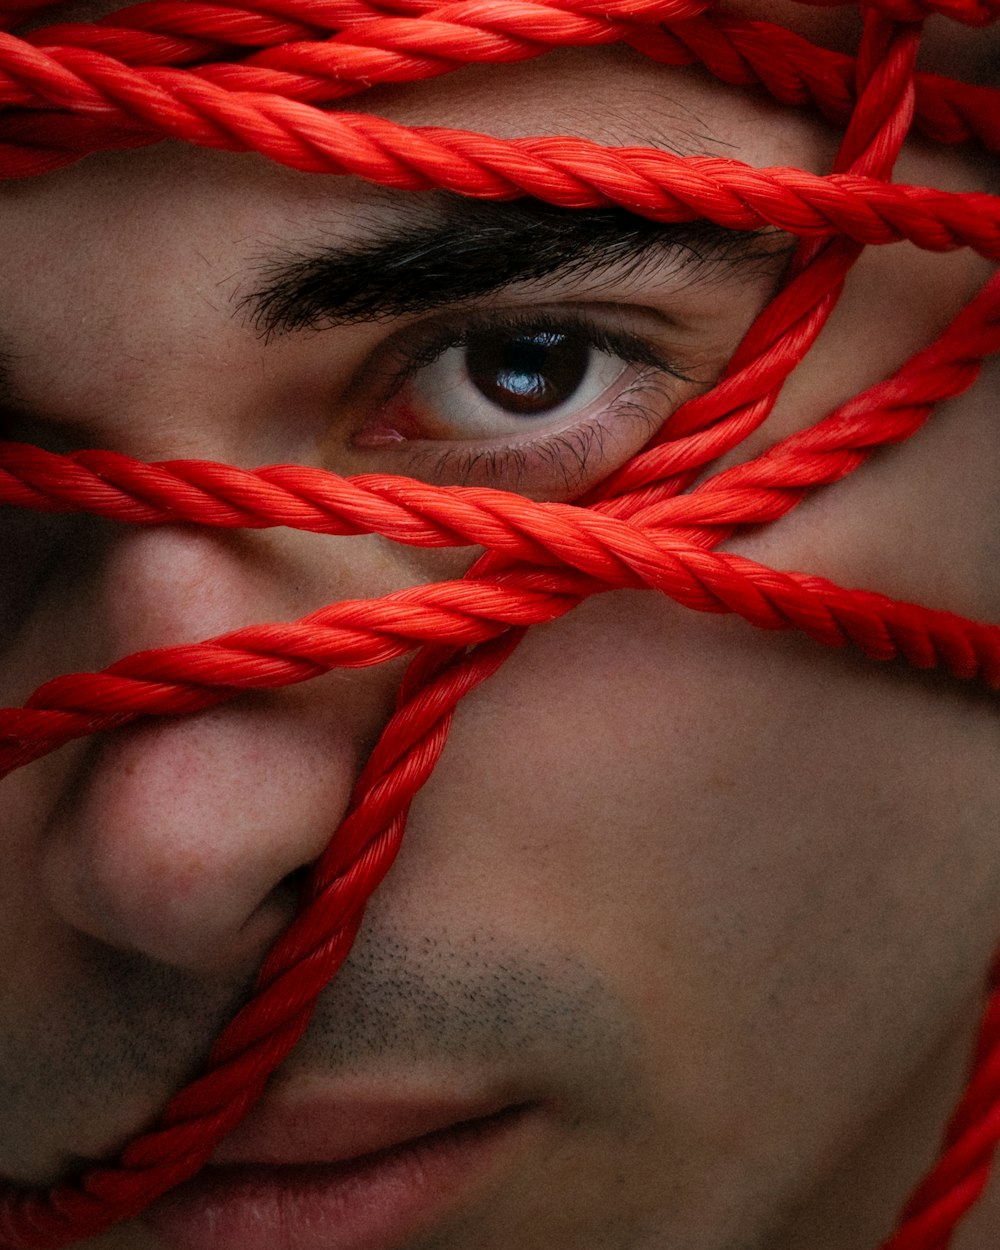 a close up of a man's face with red ropes on his face